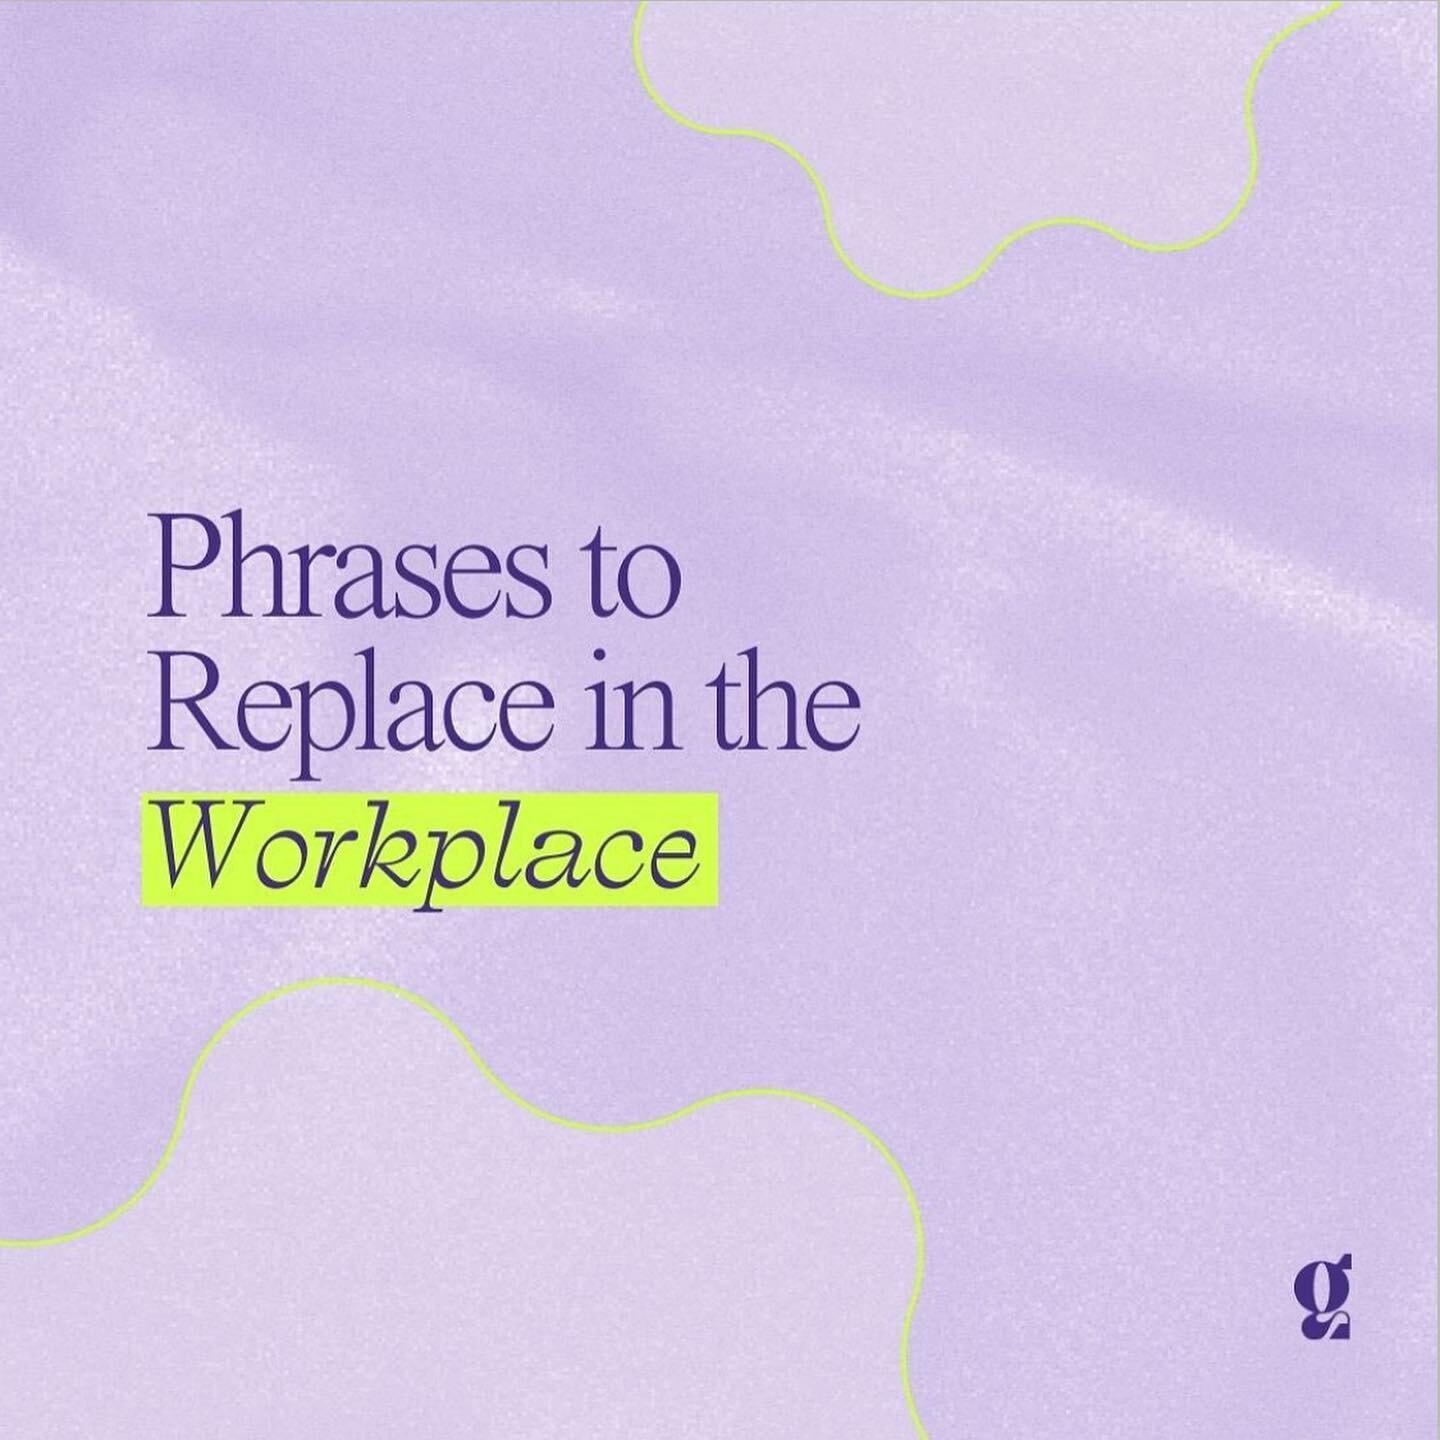 WORDS ARE POWERFUL /❋ / Phrases to replace in the workplace. What would you add to this list?

Let&rsquo;s empower ourselves with our choice of words in the workplace (and beyond), stop apologizing for doing our best, and continue leading!

❋
❋
❋

In